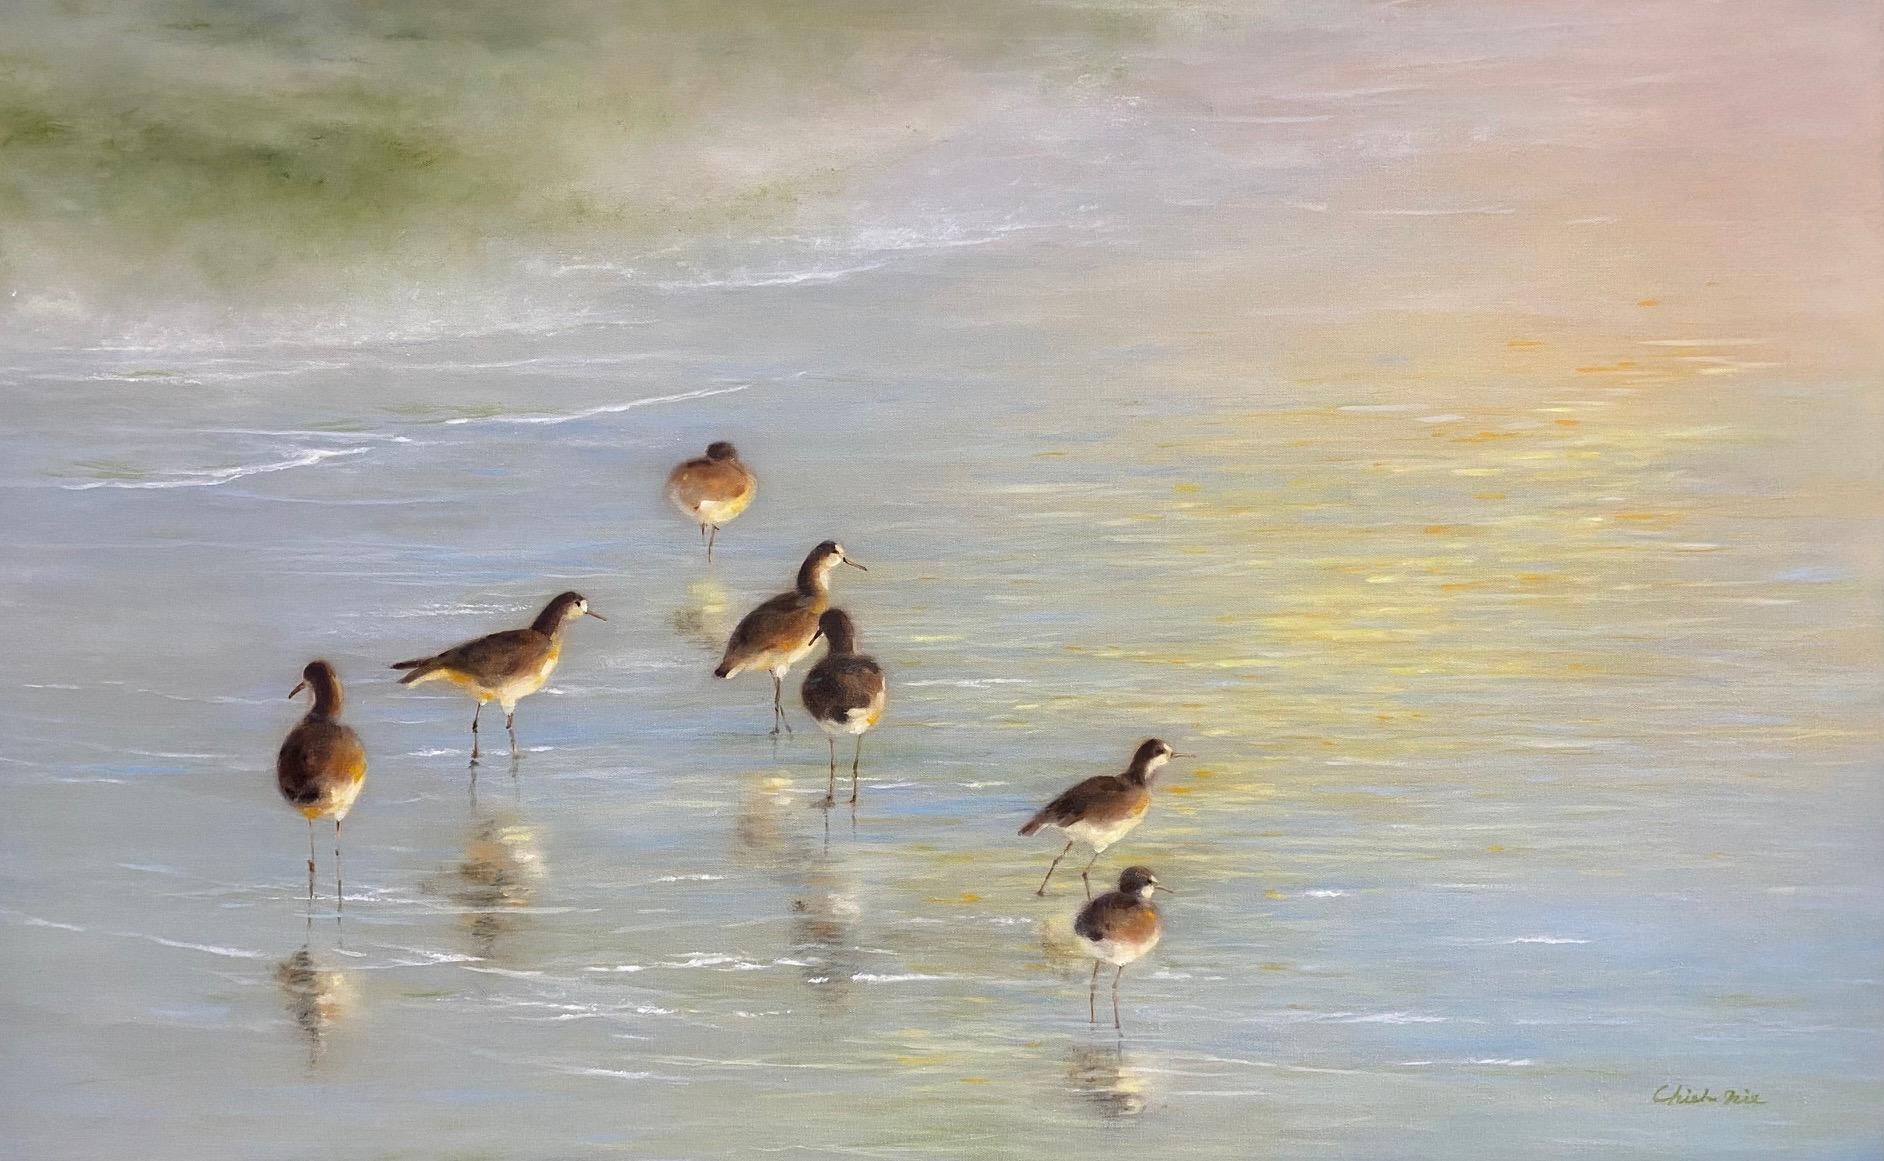 Chieh-Nie Cherng Animal Painting - Early Evening Light, original 36x48 contemporary marine landscape